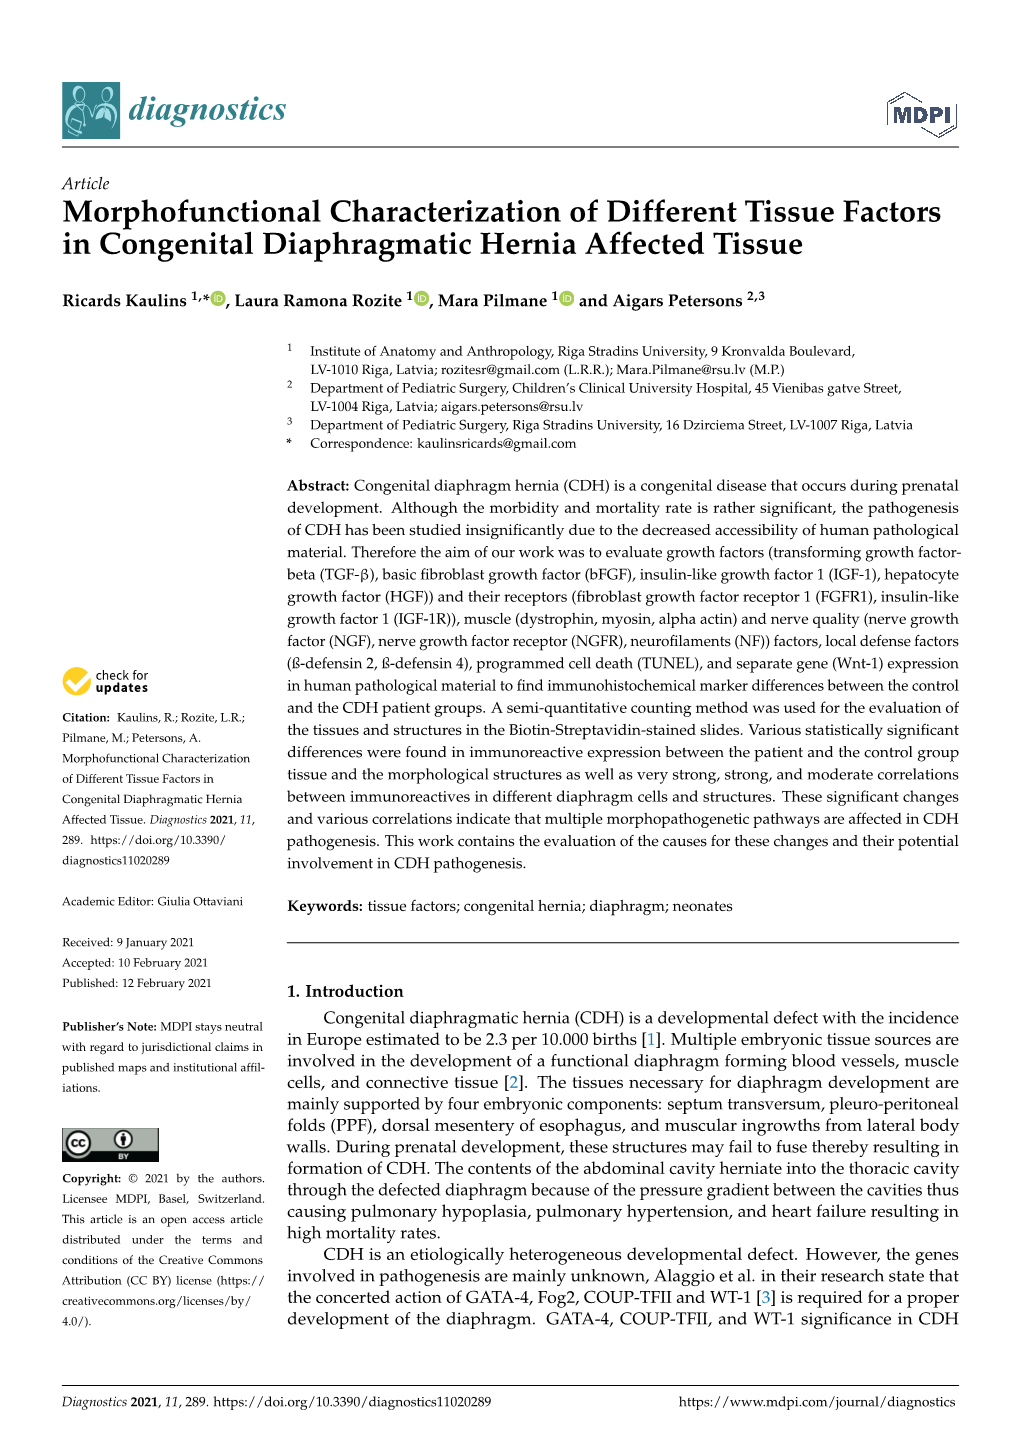 Morphofunctional Characterization of Different Tissue Factors in Congenital Diaphragmatic Hernia Affected Tissue